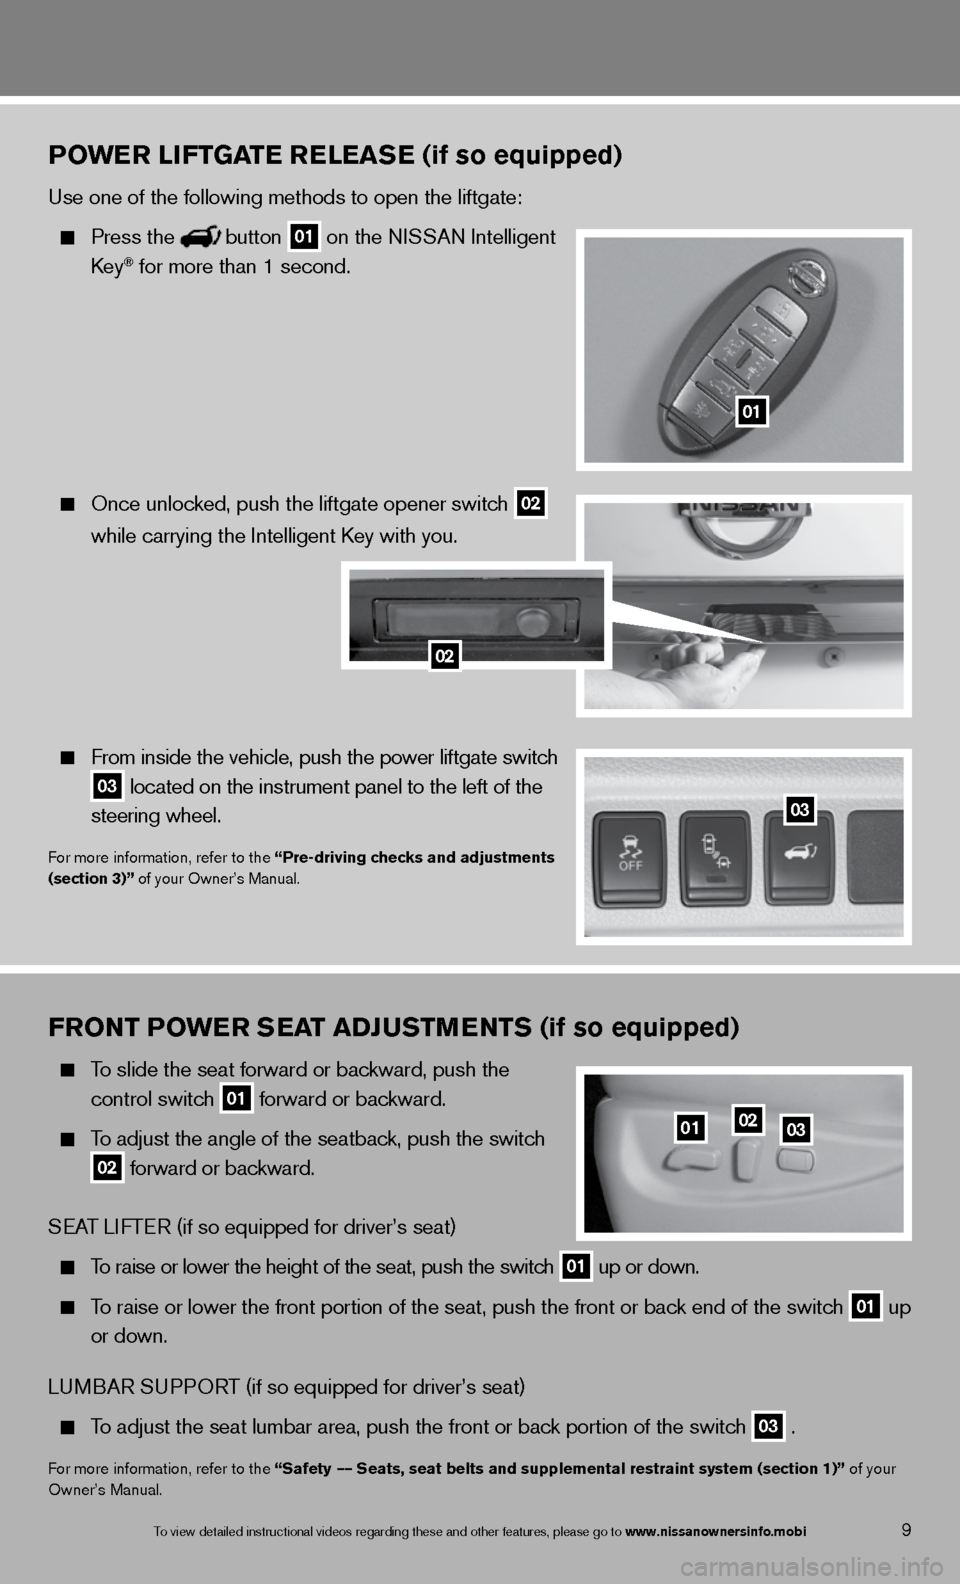 NISSAN QUEST 2013 RE52 / 4.G Quick Reference Guide FrONT PO wer SeaT aDJ uSTM eNTS (if so equipped)
   To slide the seat forward or backward, push the 
    control switch 
01 forward or backward. 
 
 
  To adjust the angle of the seatback, push the sw